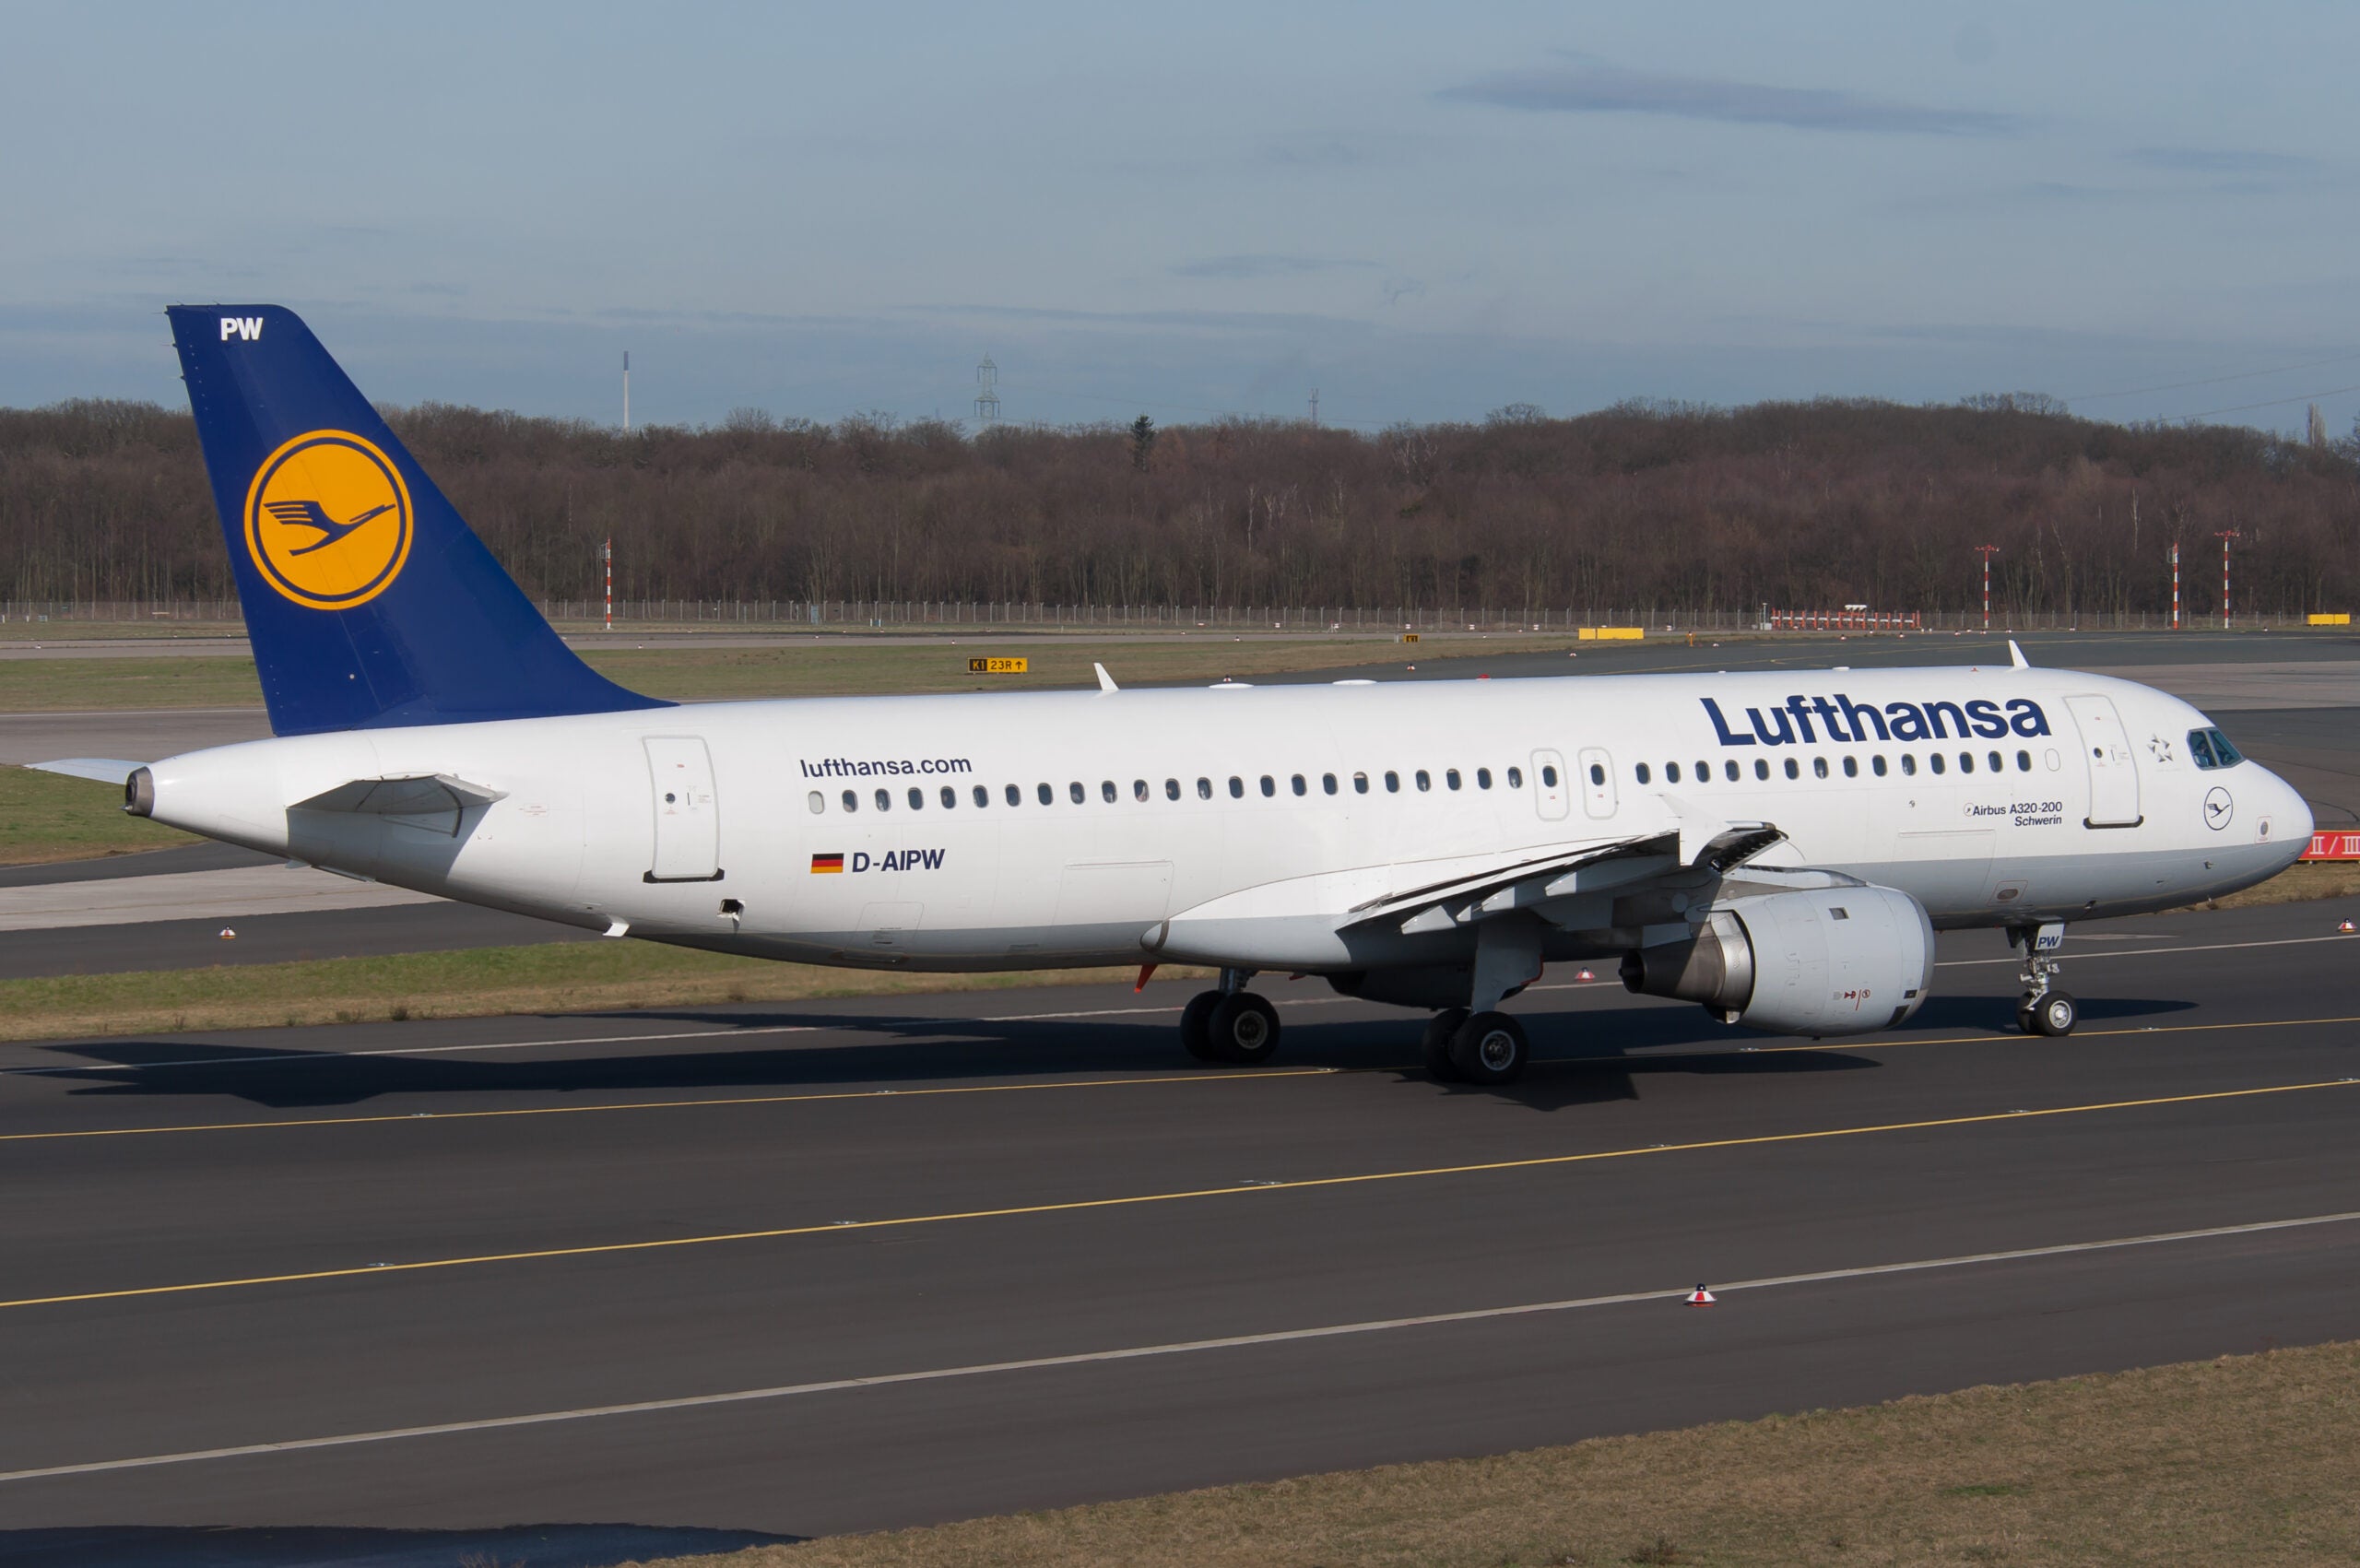 D-AIPW in Lufthansa livery